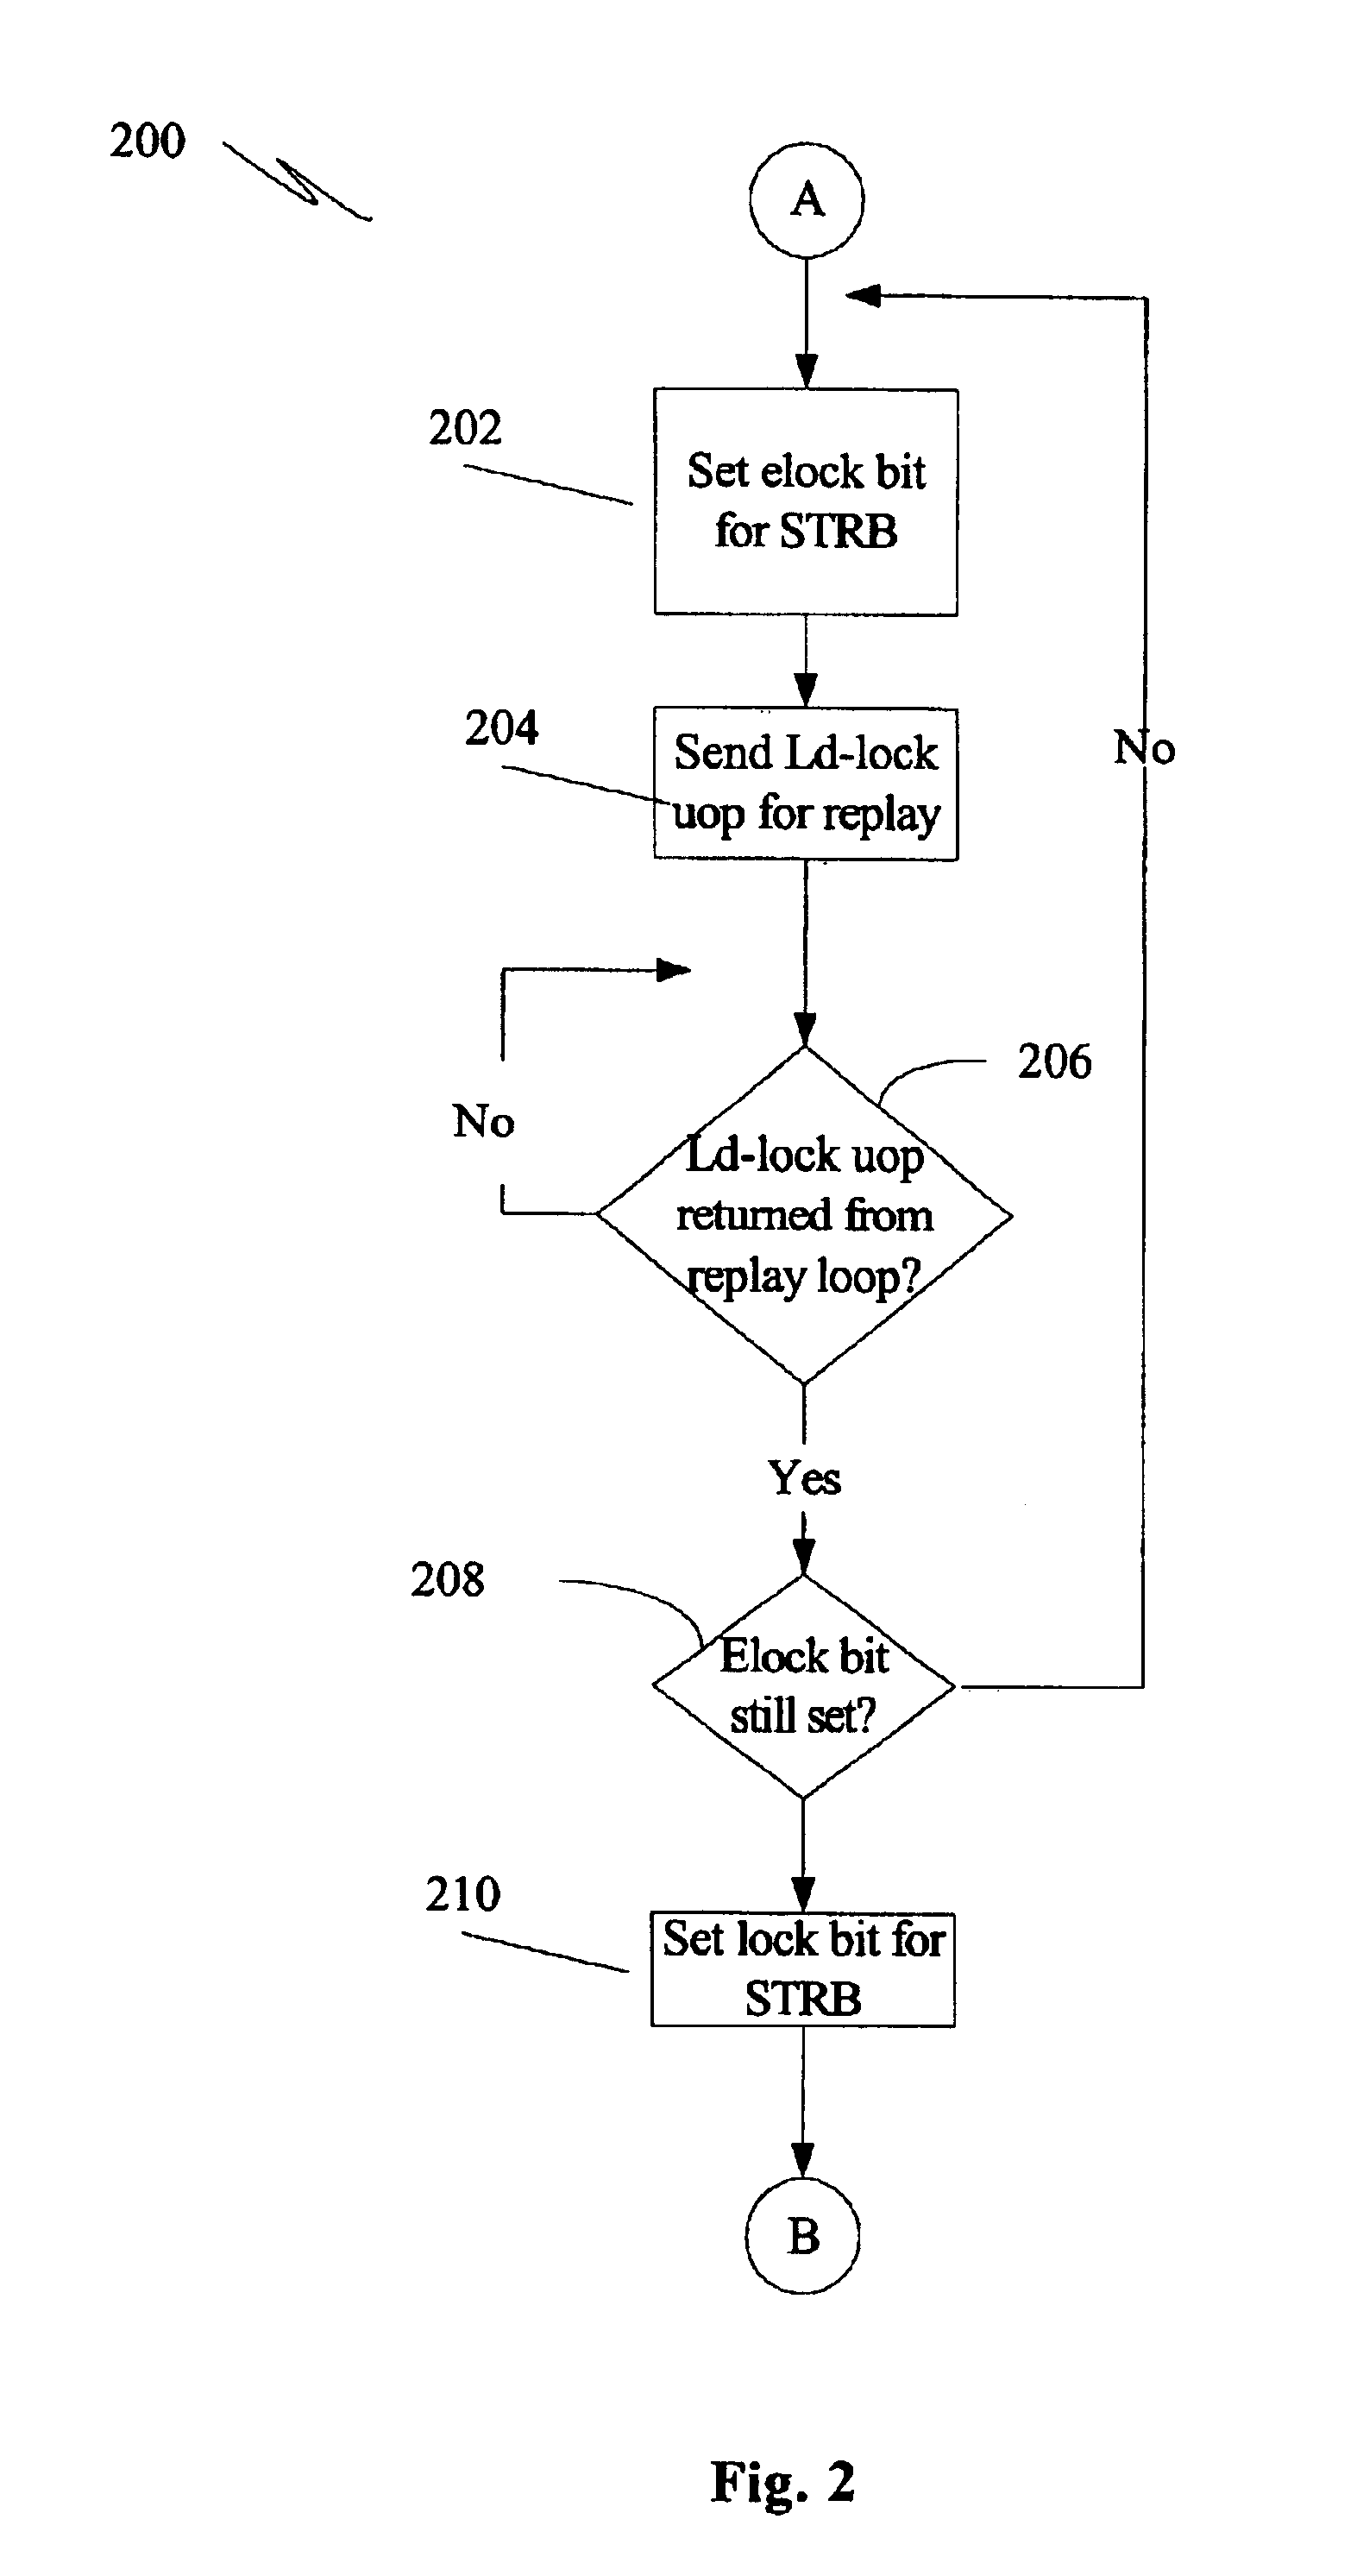 Cache lock mechanism with speculative allocation